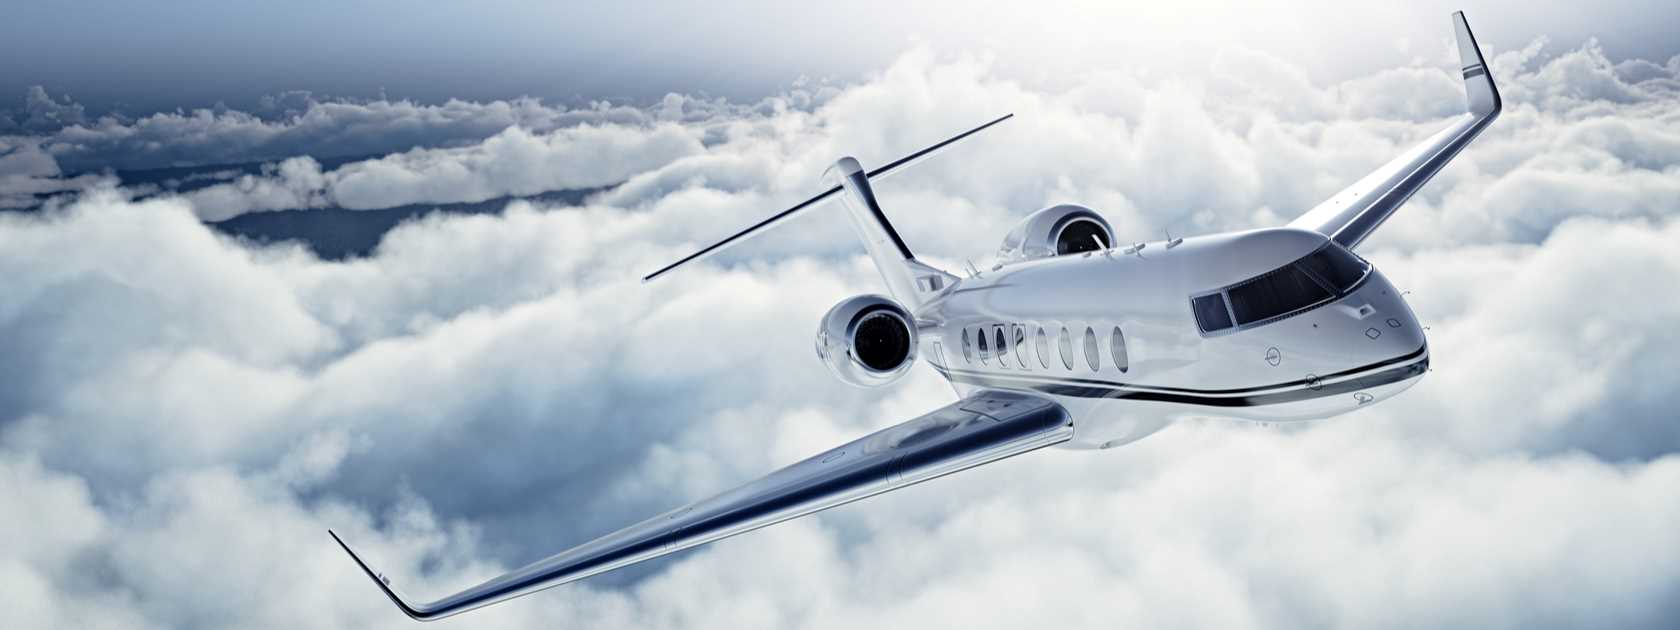 A private jet flying above the clouds